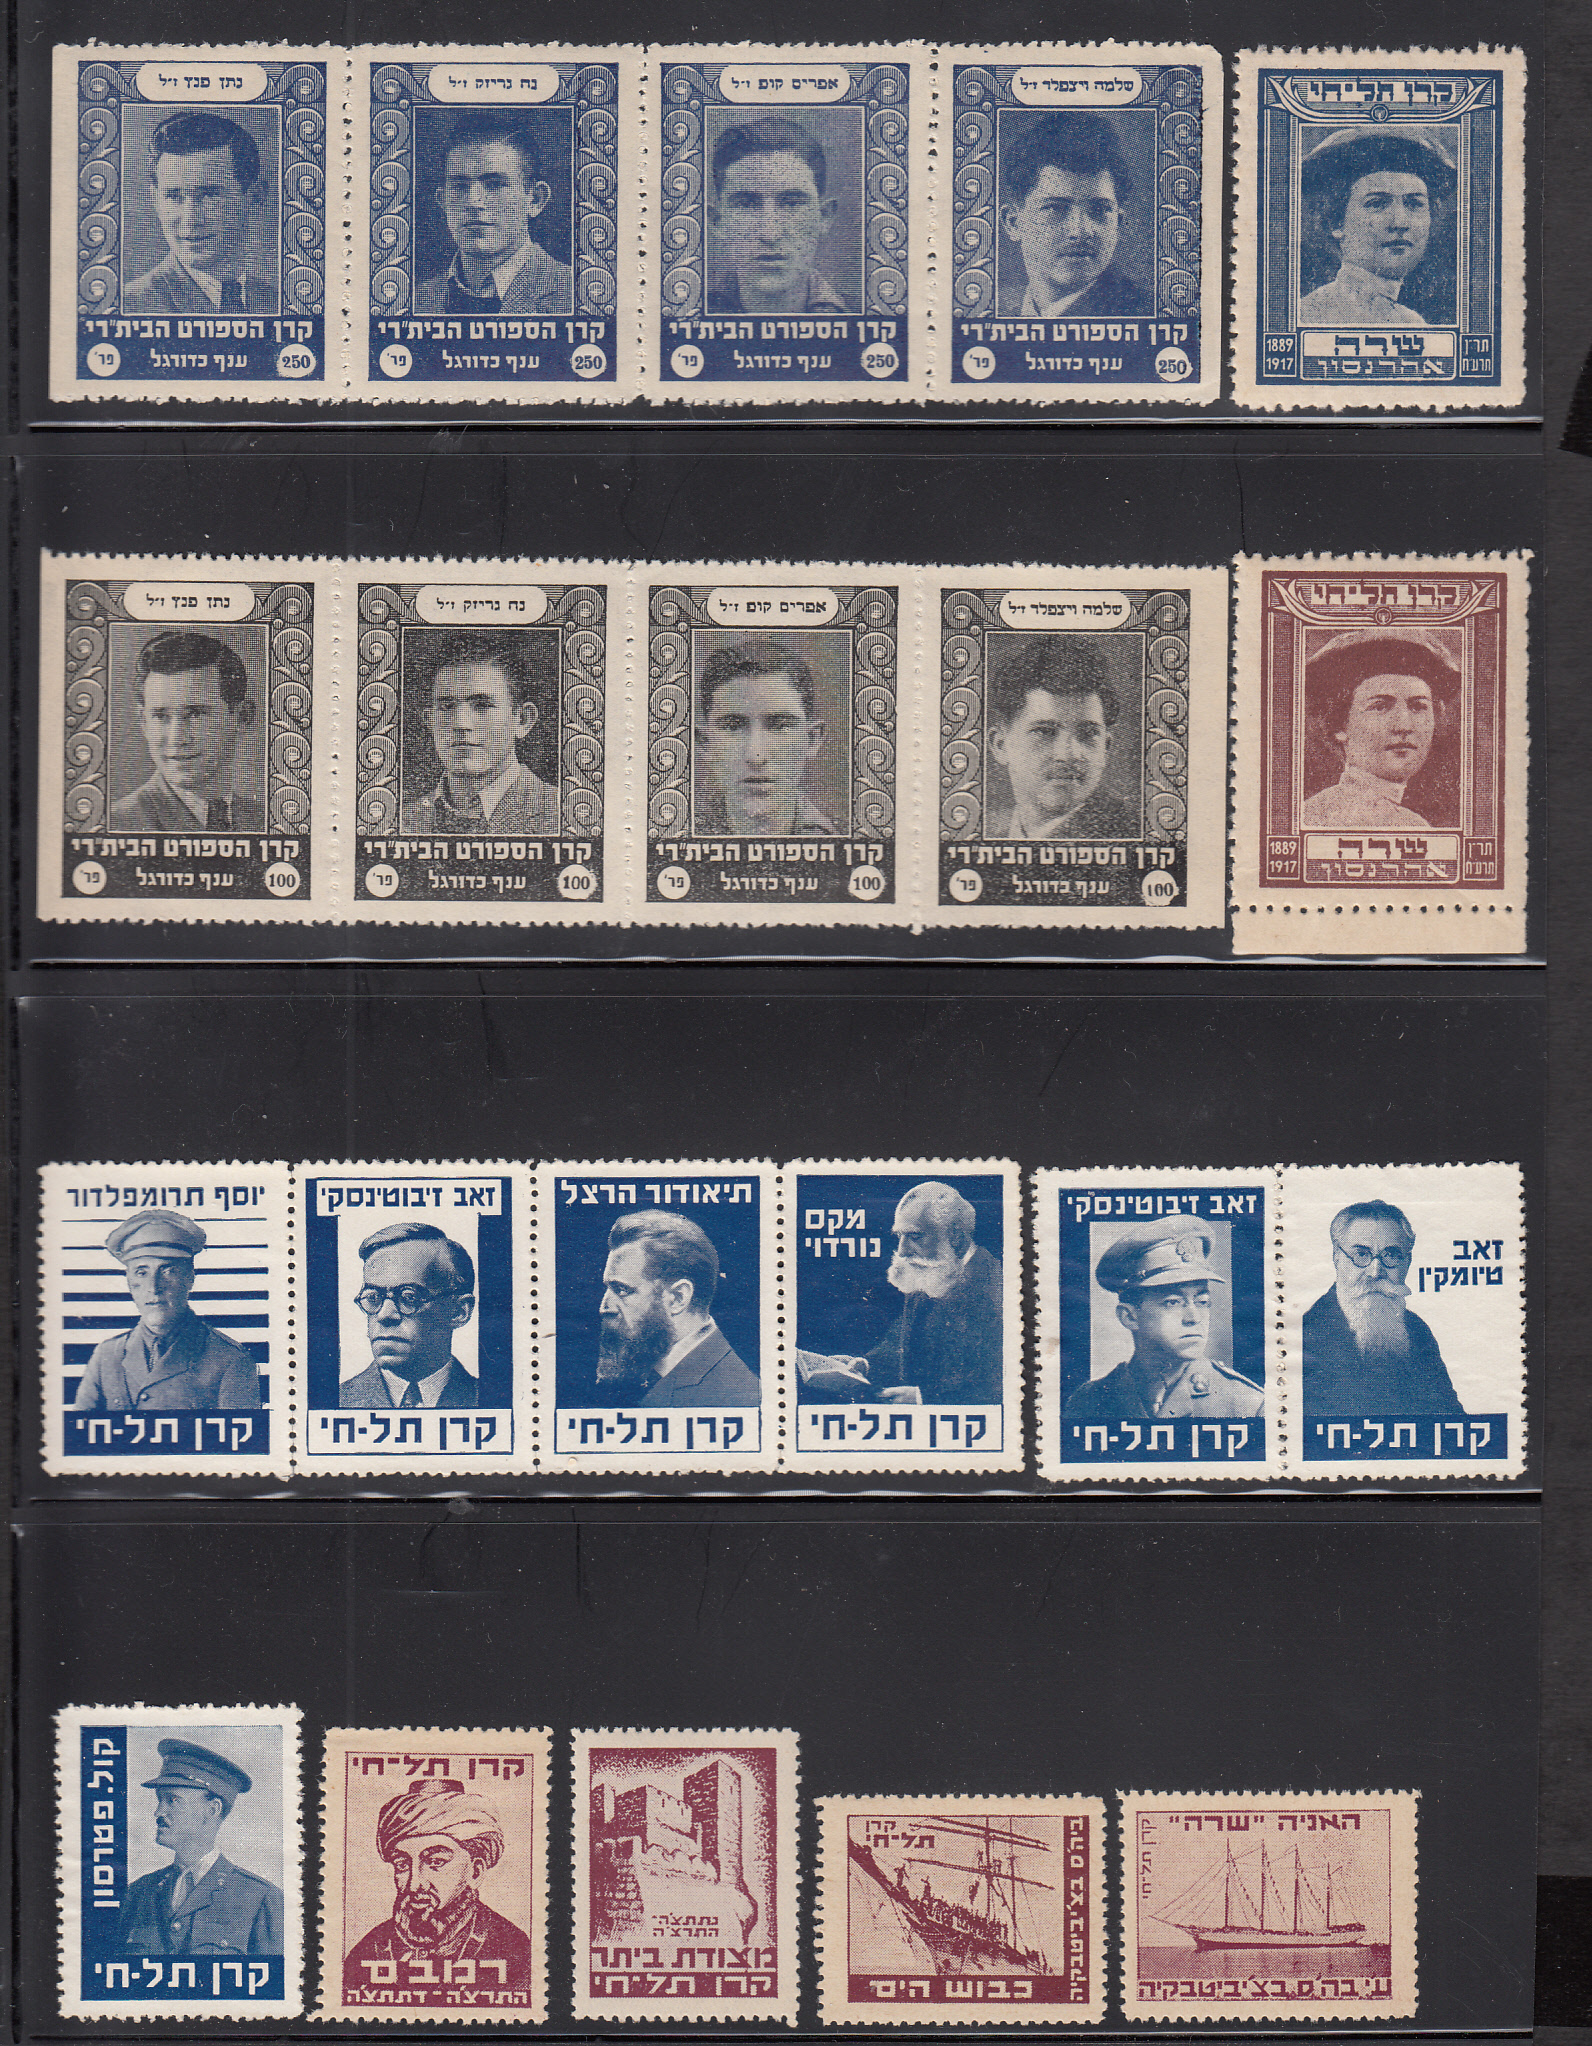 Lot 319 - Judaica, Holocaust, Anti Semitic, Autographs & related material  -  Doron Waide Mail Auction #40